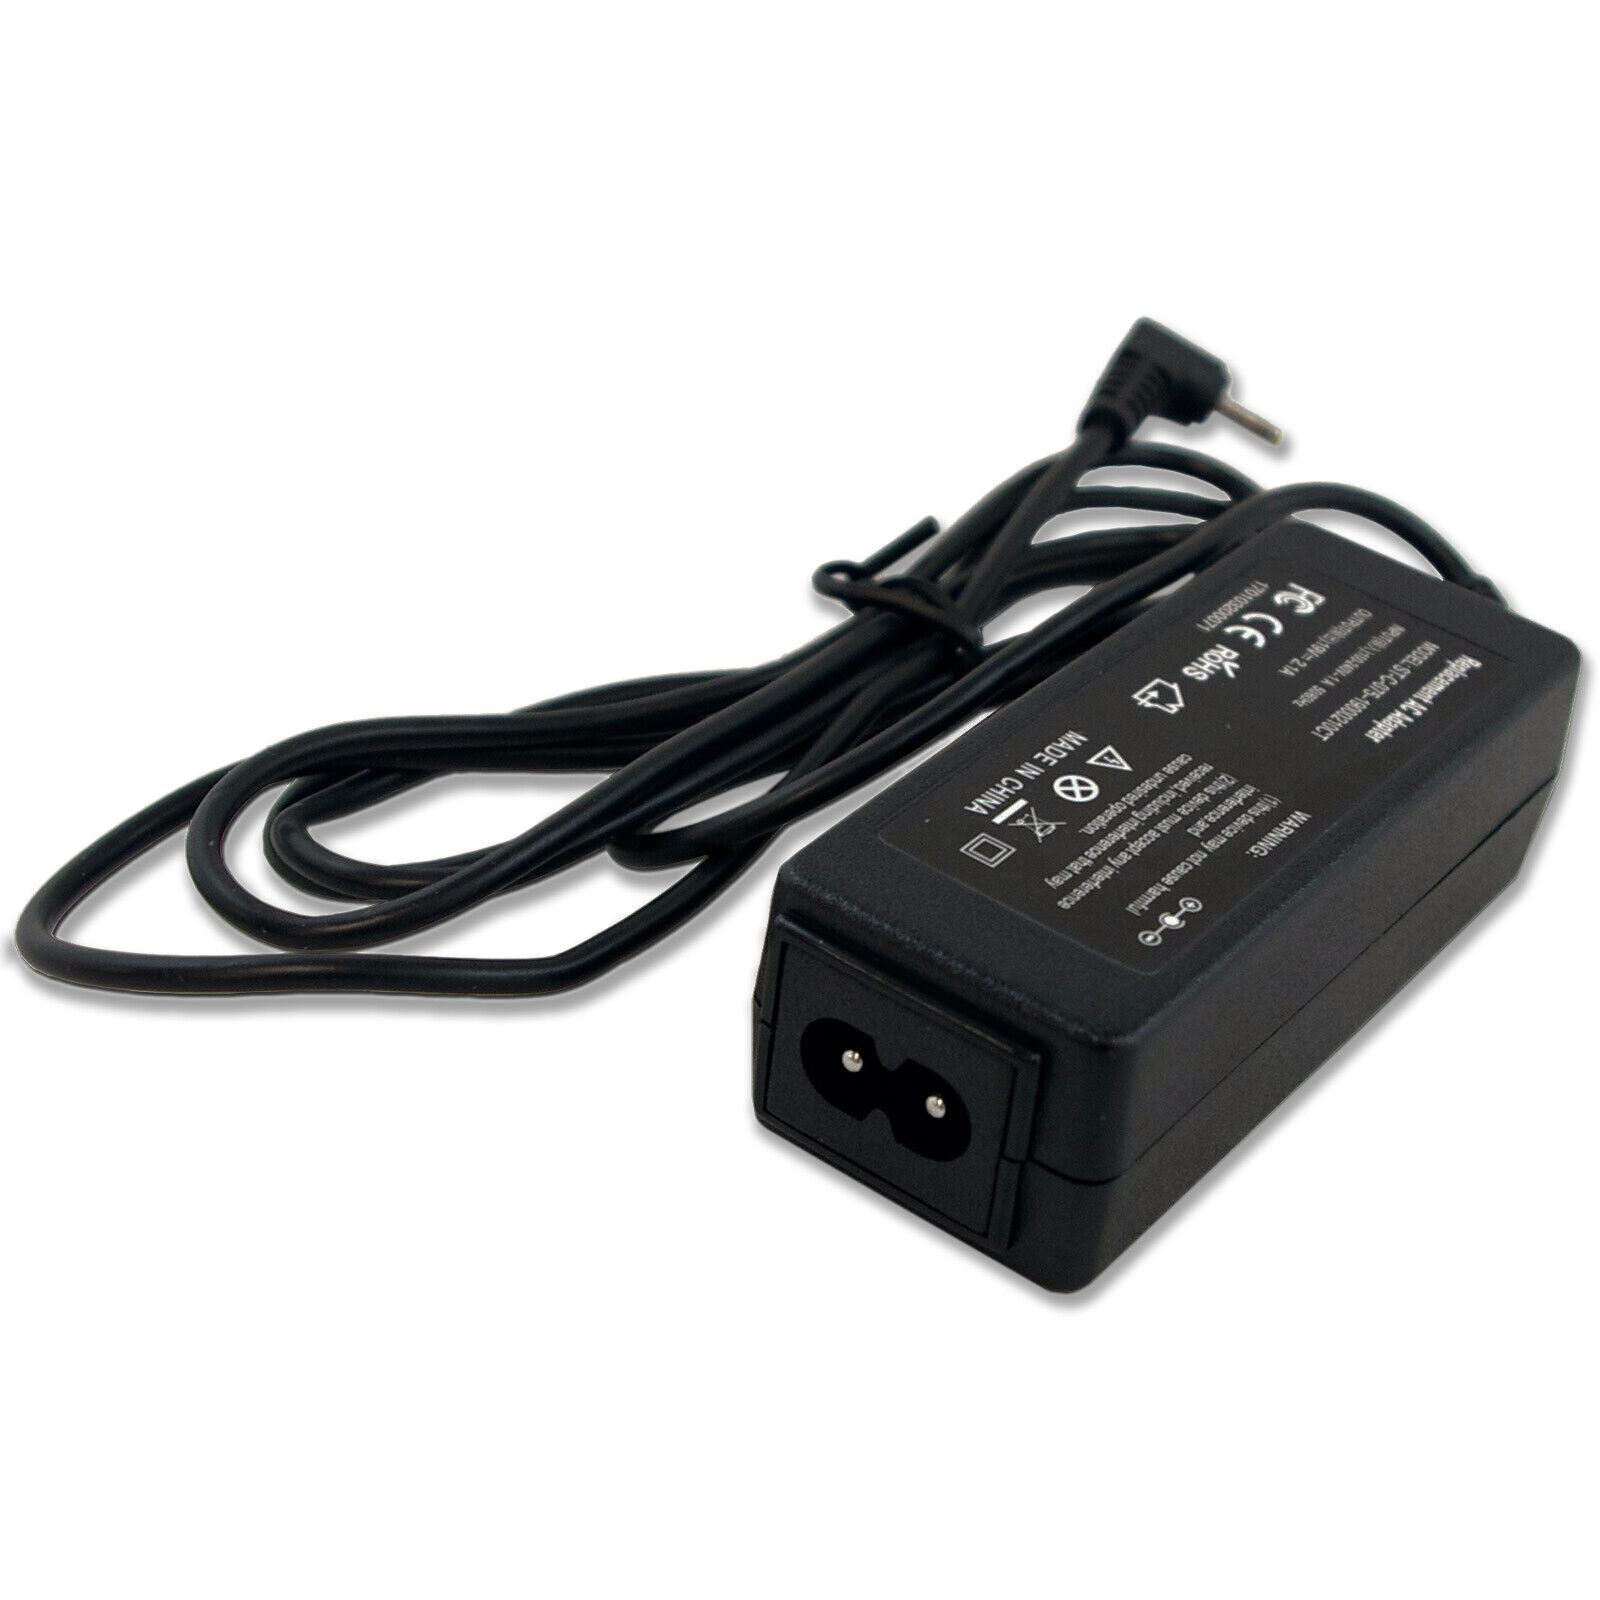 AC Adapter Laptop Charger For Asus Eee Pc 1225B 1011px 1011CX X101CH Power Cord